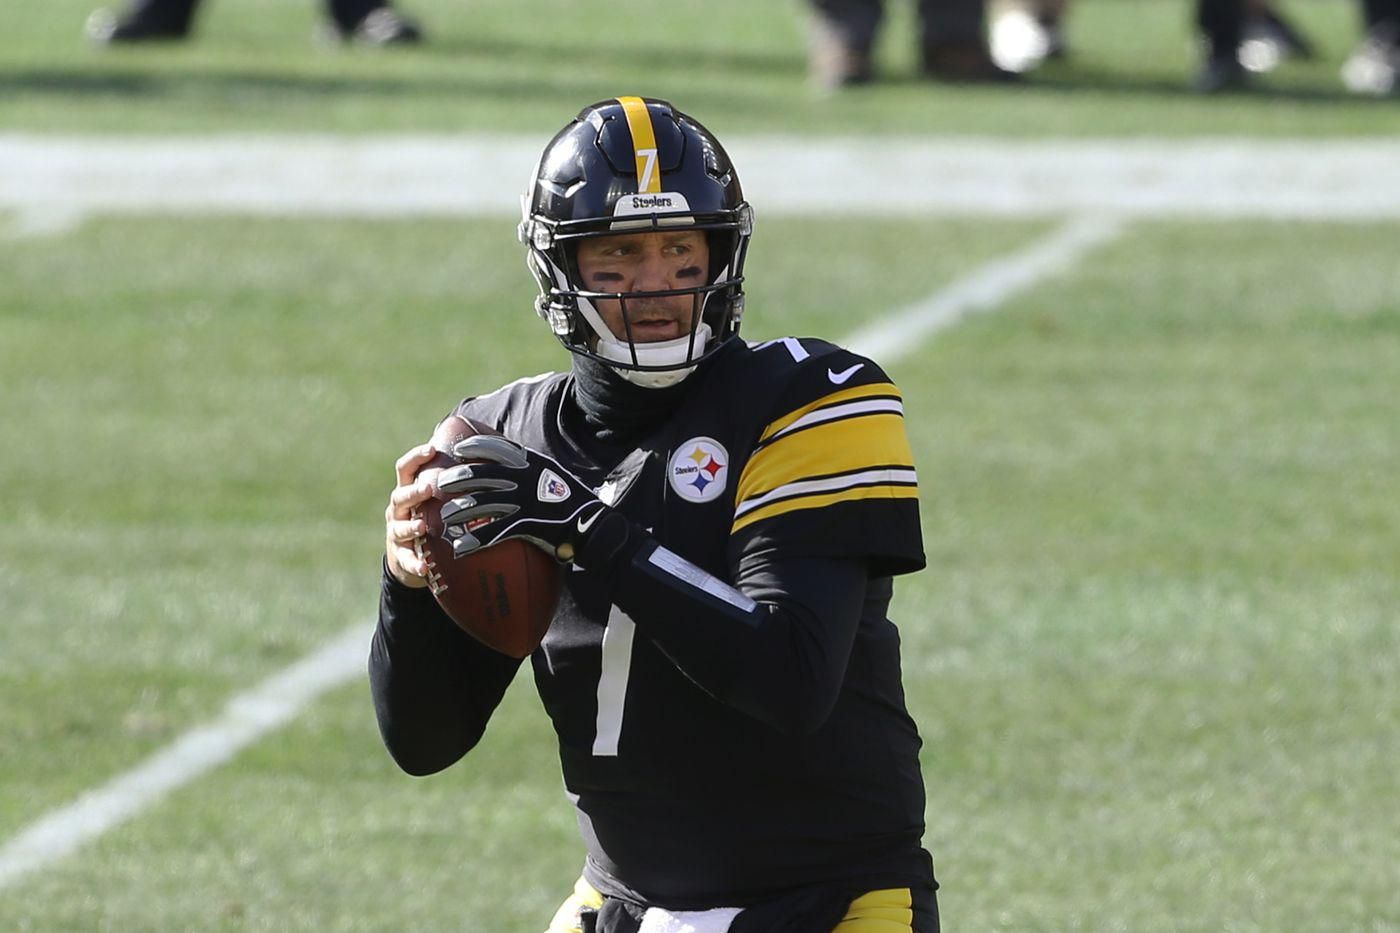 Pittsburgh Steelers quarterback Ben Roethlisberger gets ready to throw